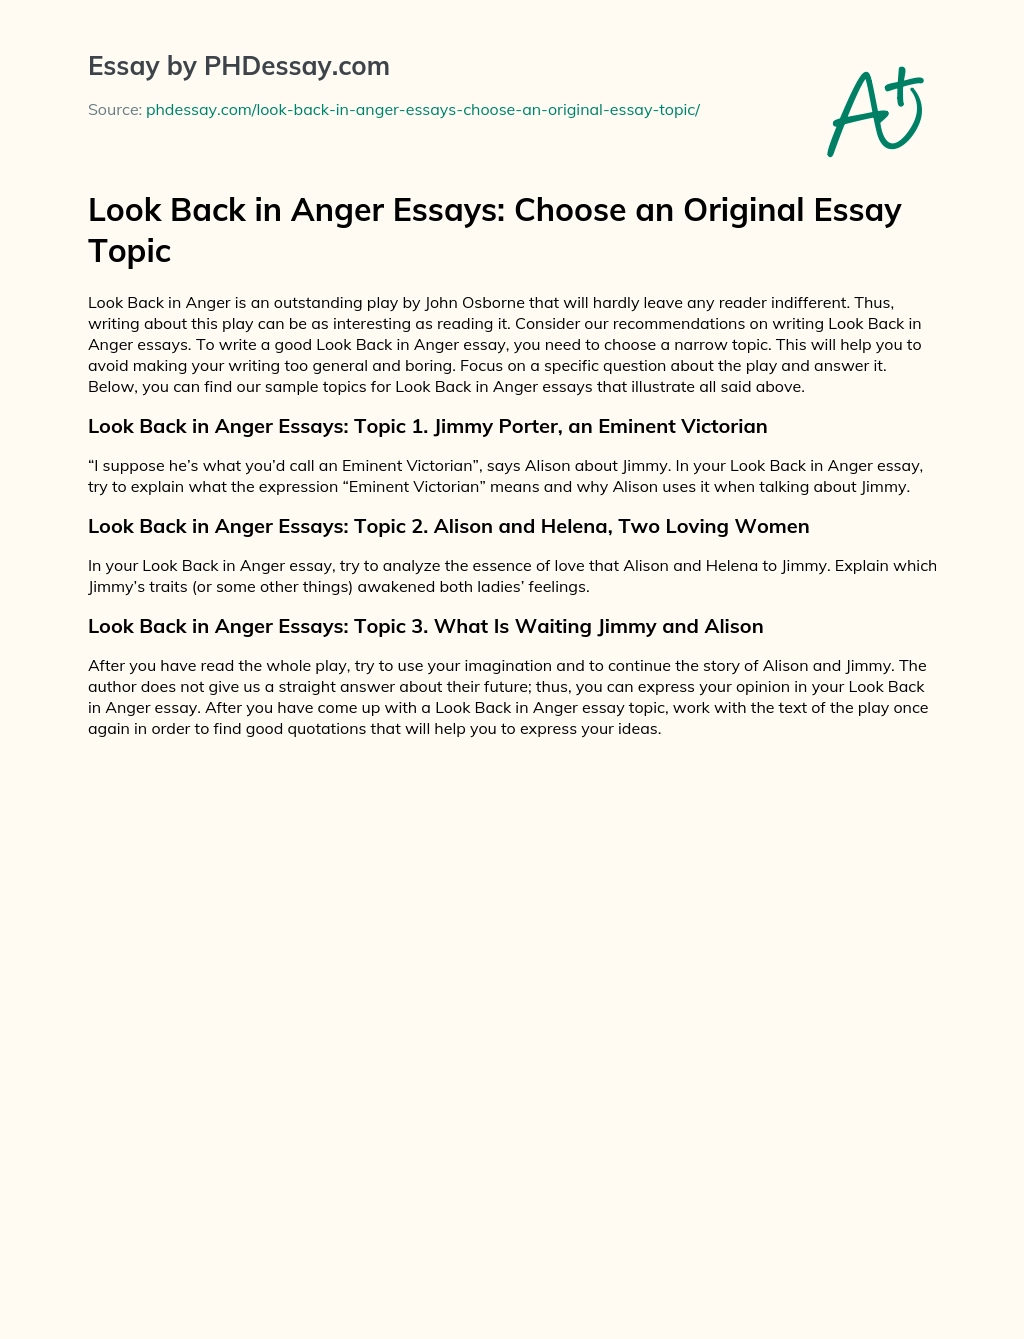 Look Back in Anger Essays: Choose an Original Essay Topic essay